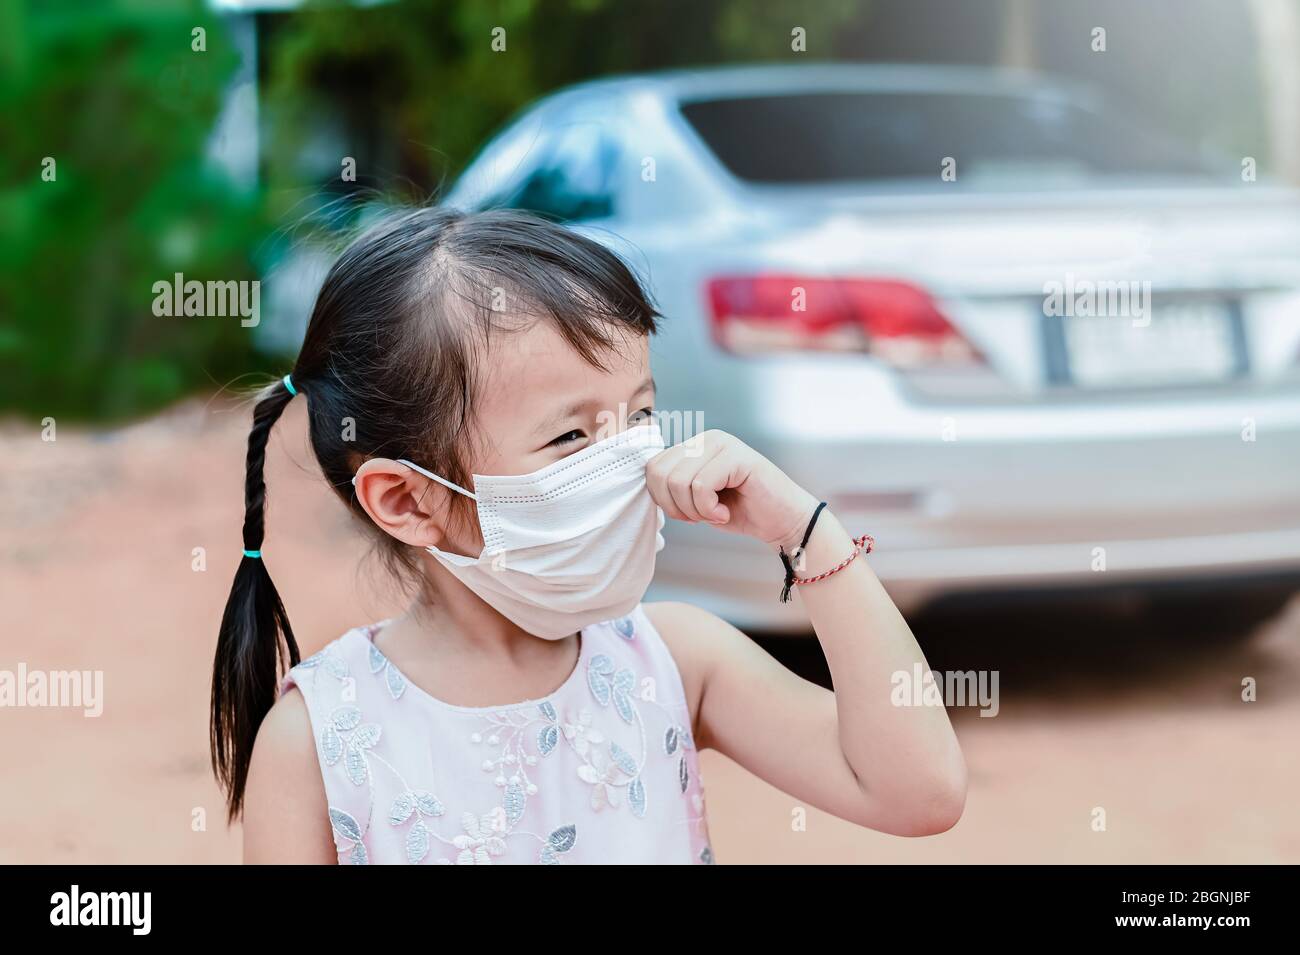 Little girl has Medical face mask protect herself from Coronavirus COVID-19,hand stop sign when child leave the house,,child with a mask on her nose Stock Photo